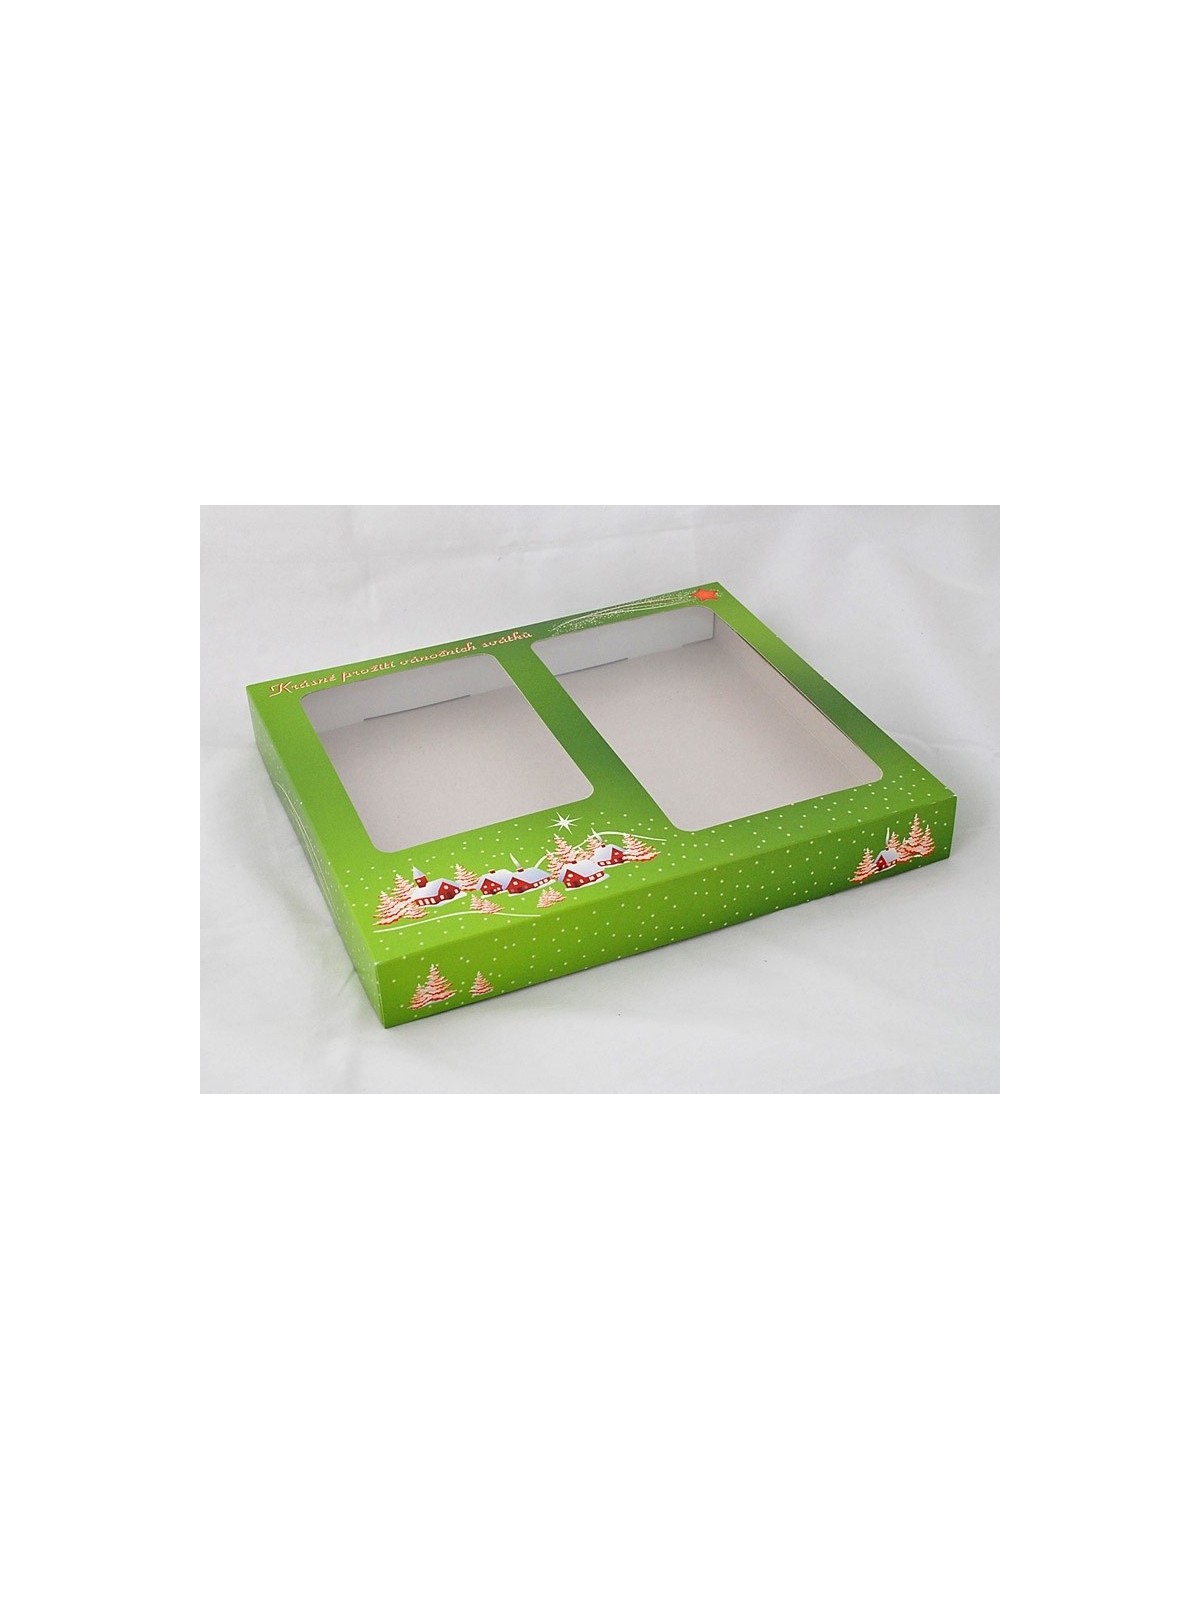 Boxes for Christmas cookies - Christmas Green - 1 kg